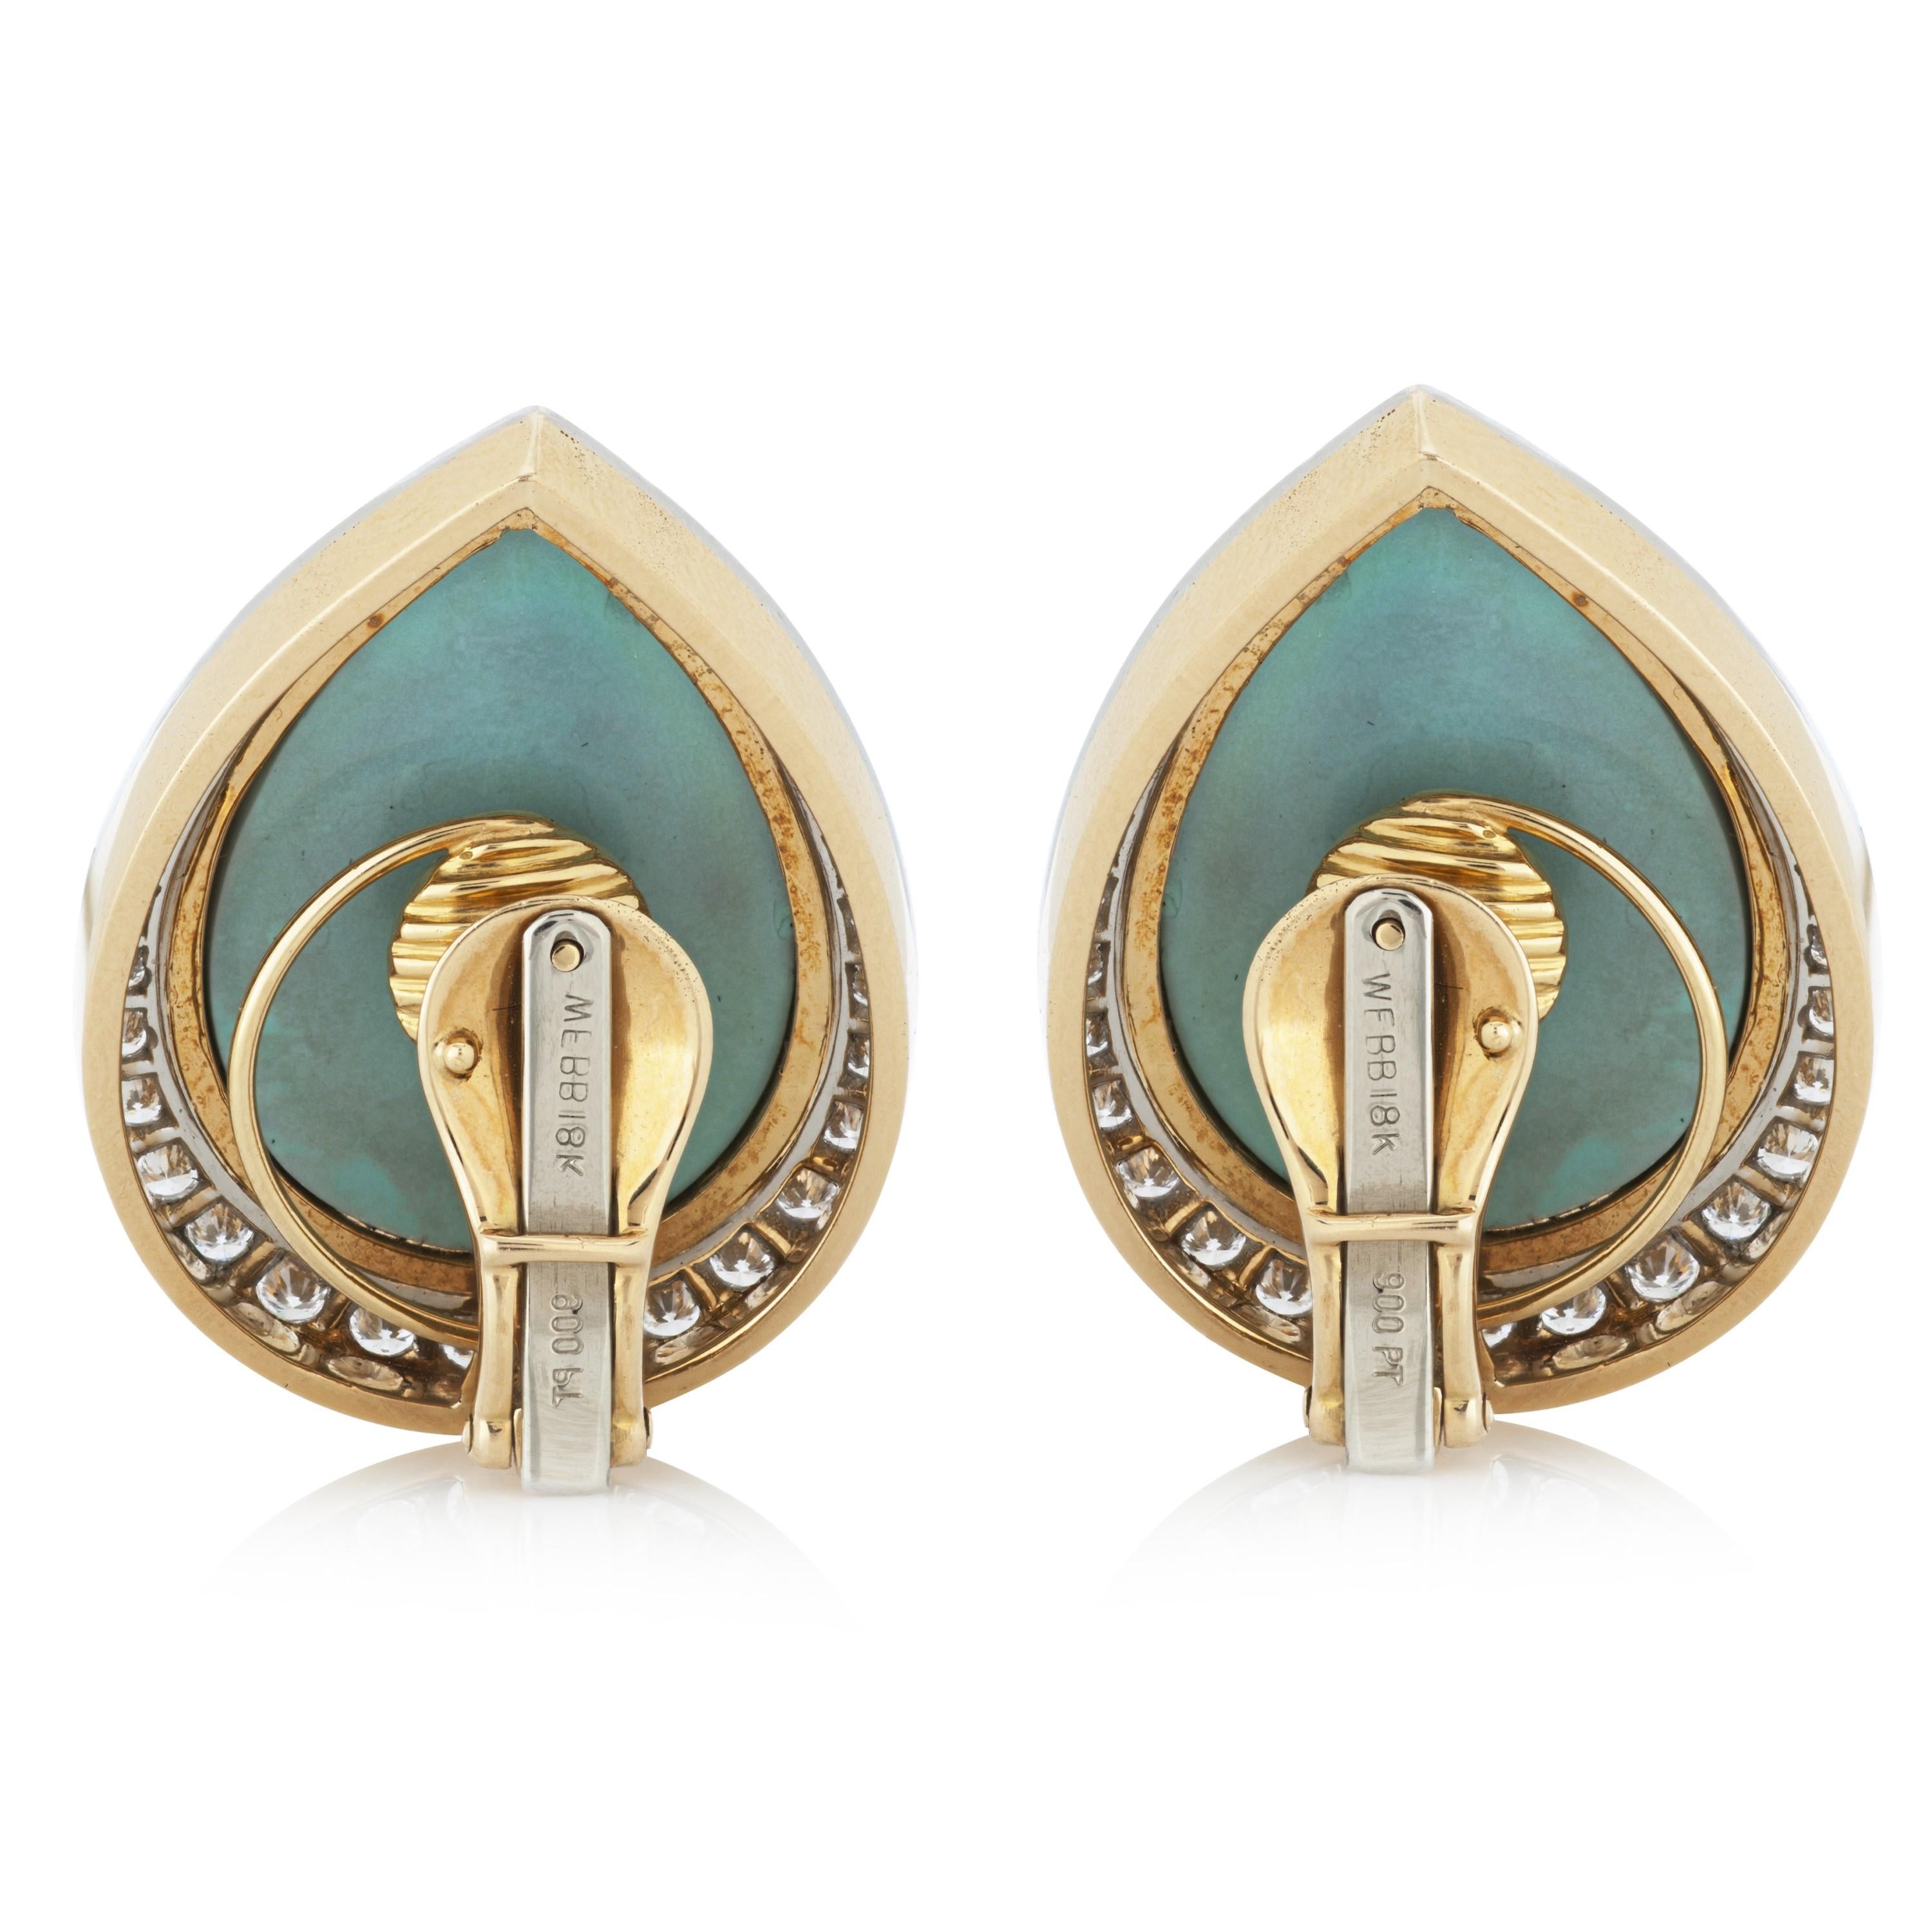 David Webb cabochon turquoise and diamond clip on earrings in 18k yellow gold and platinum, accompanied by a David Webb box and David Webb Certificate of Authenticity.  

The center stones of these earrings are two pieces of pear shaped cabochon